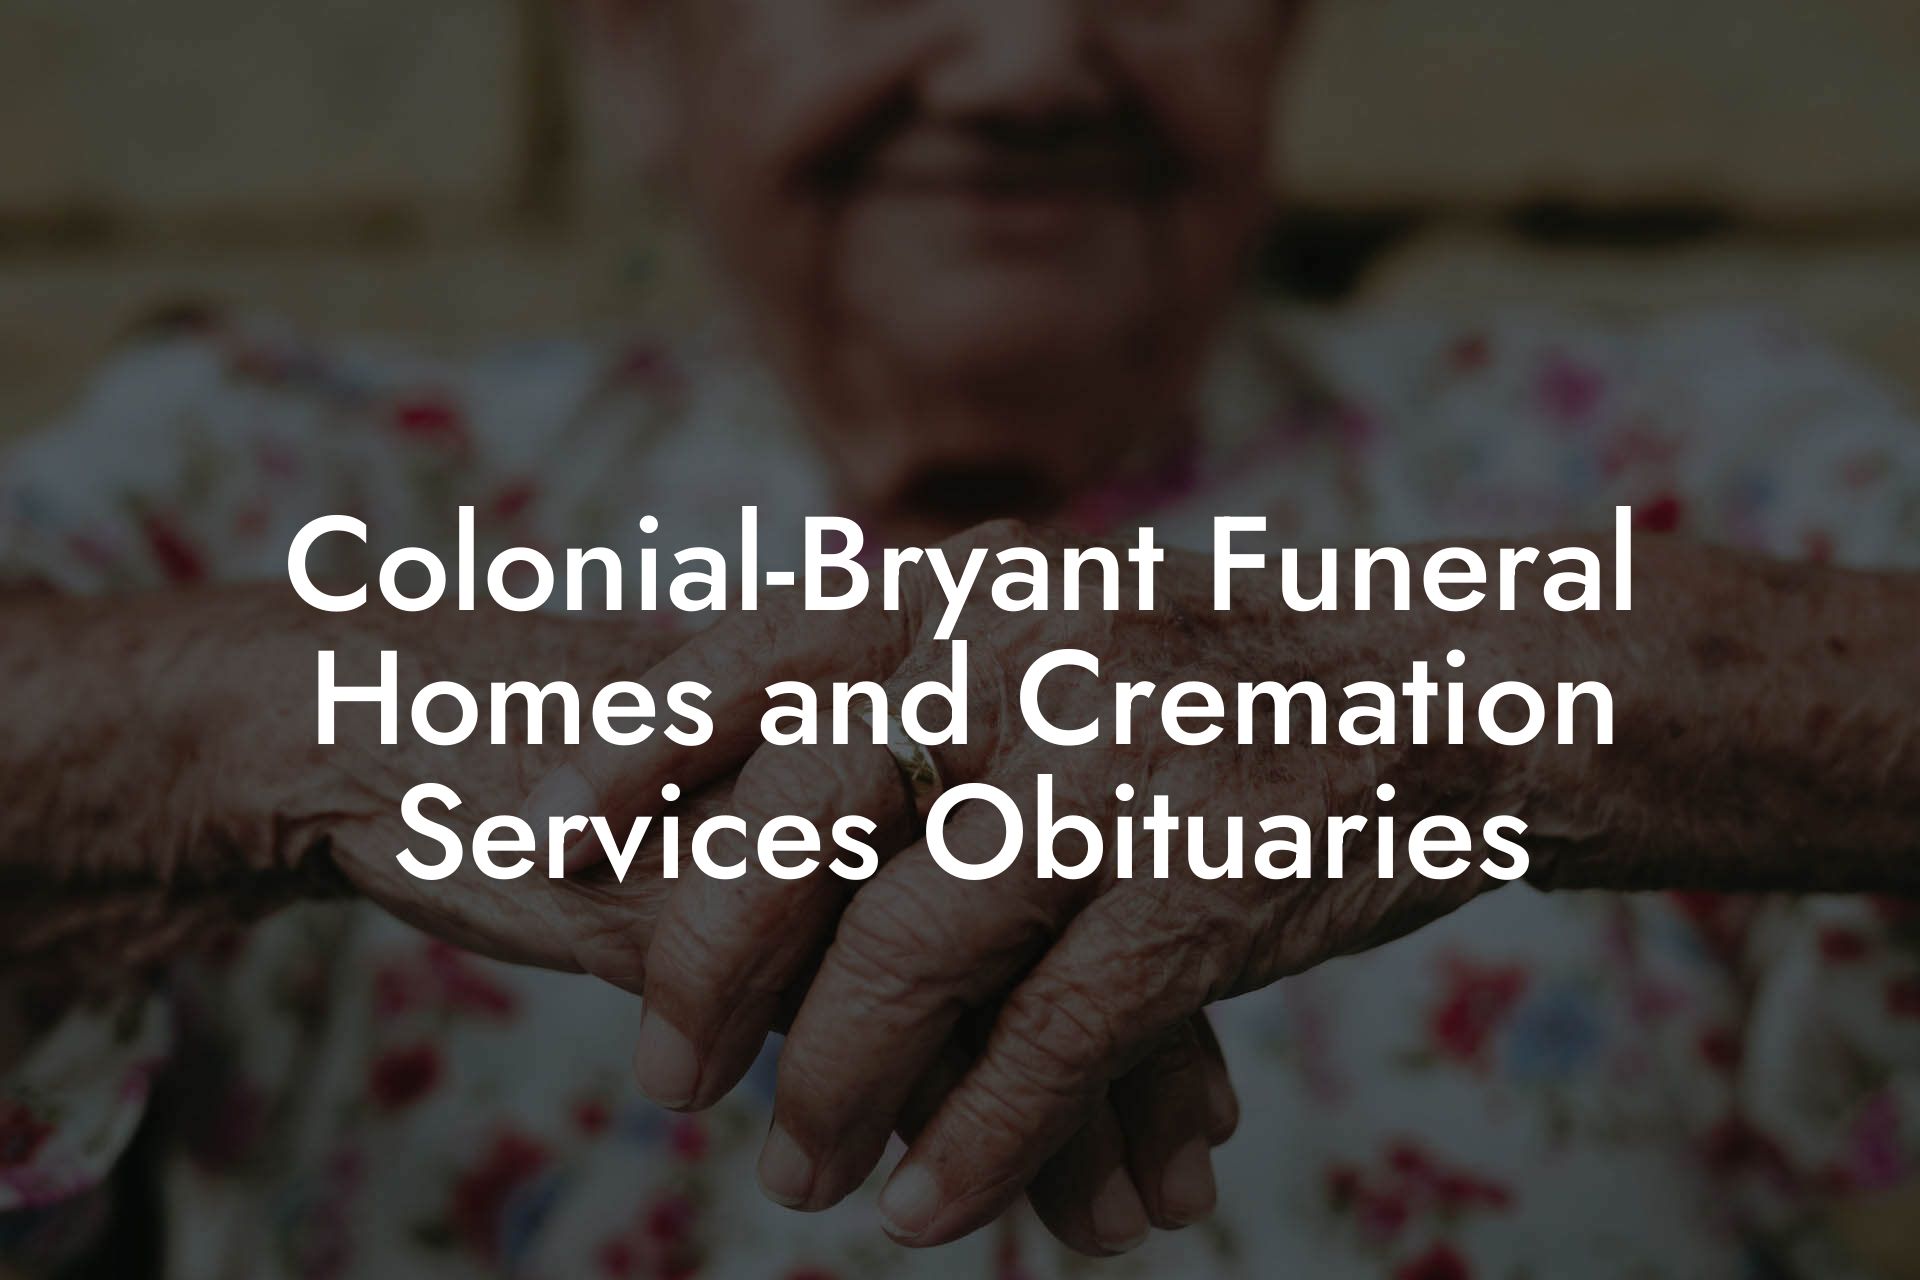 Colonial-Bryant Funeral Homes and Cremation Services Obituaries